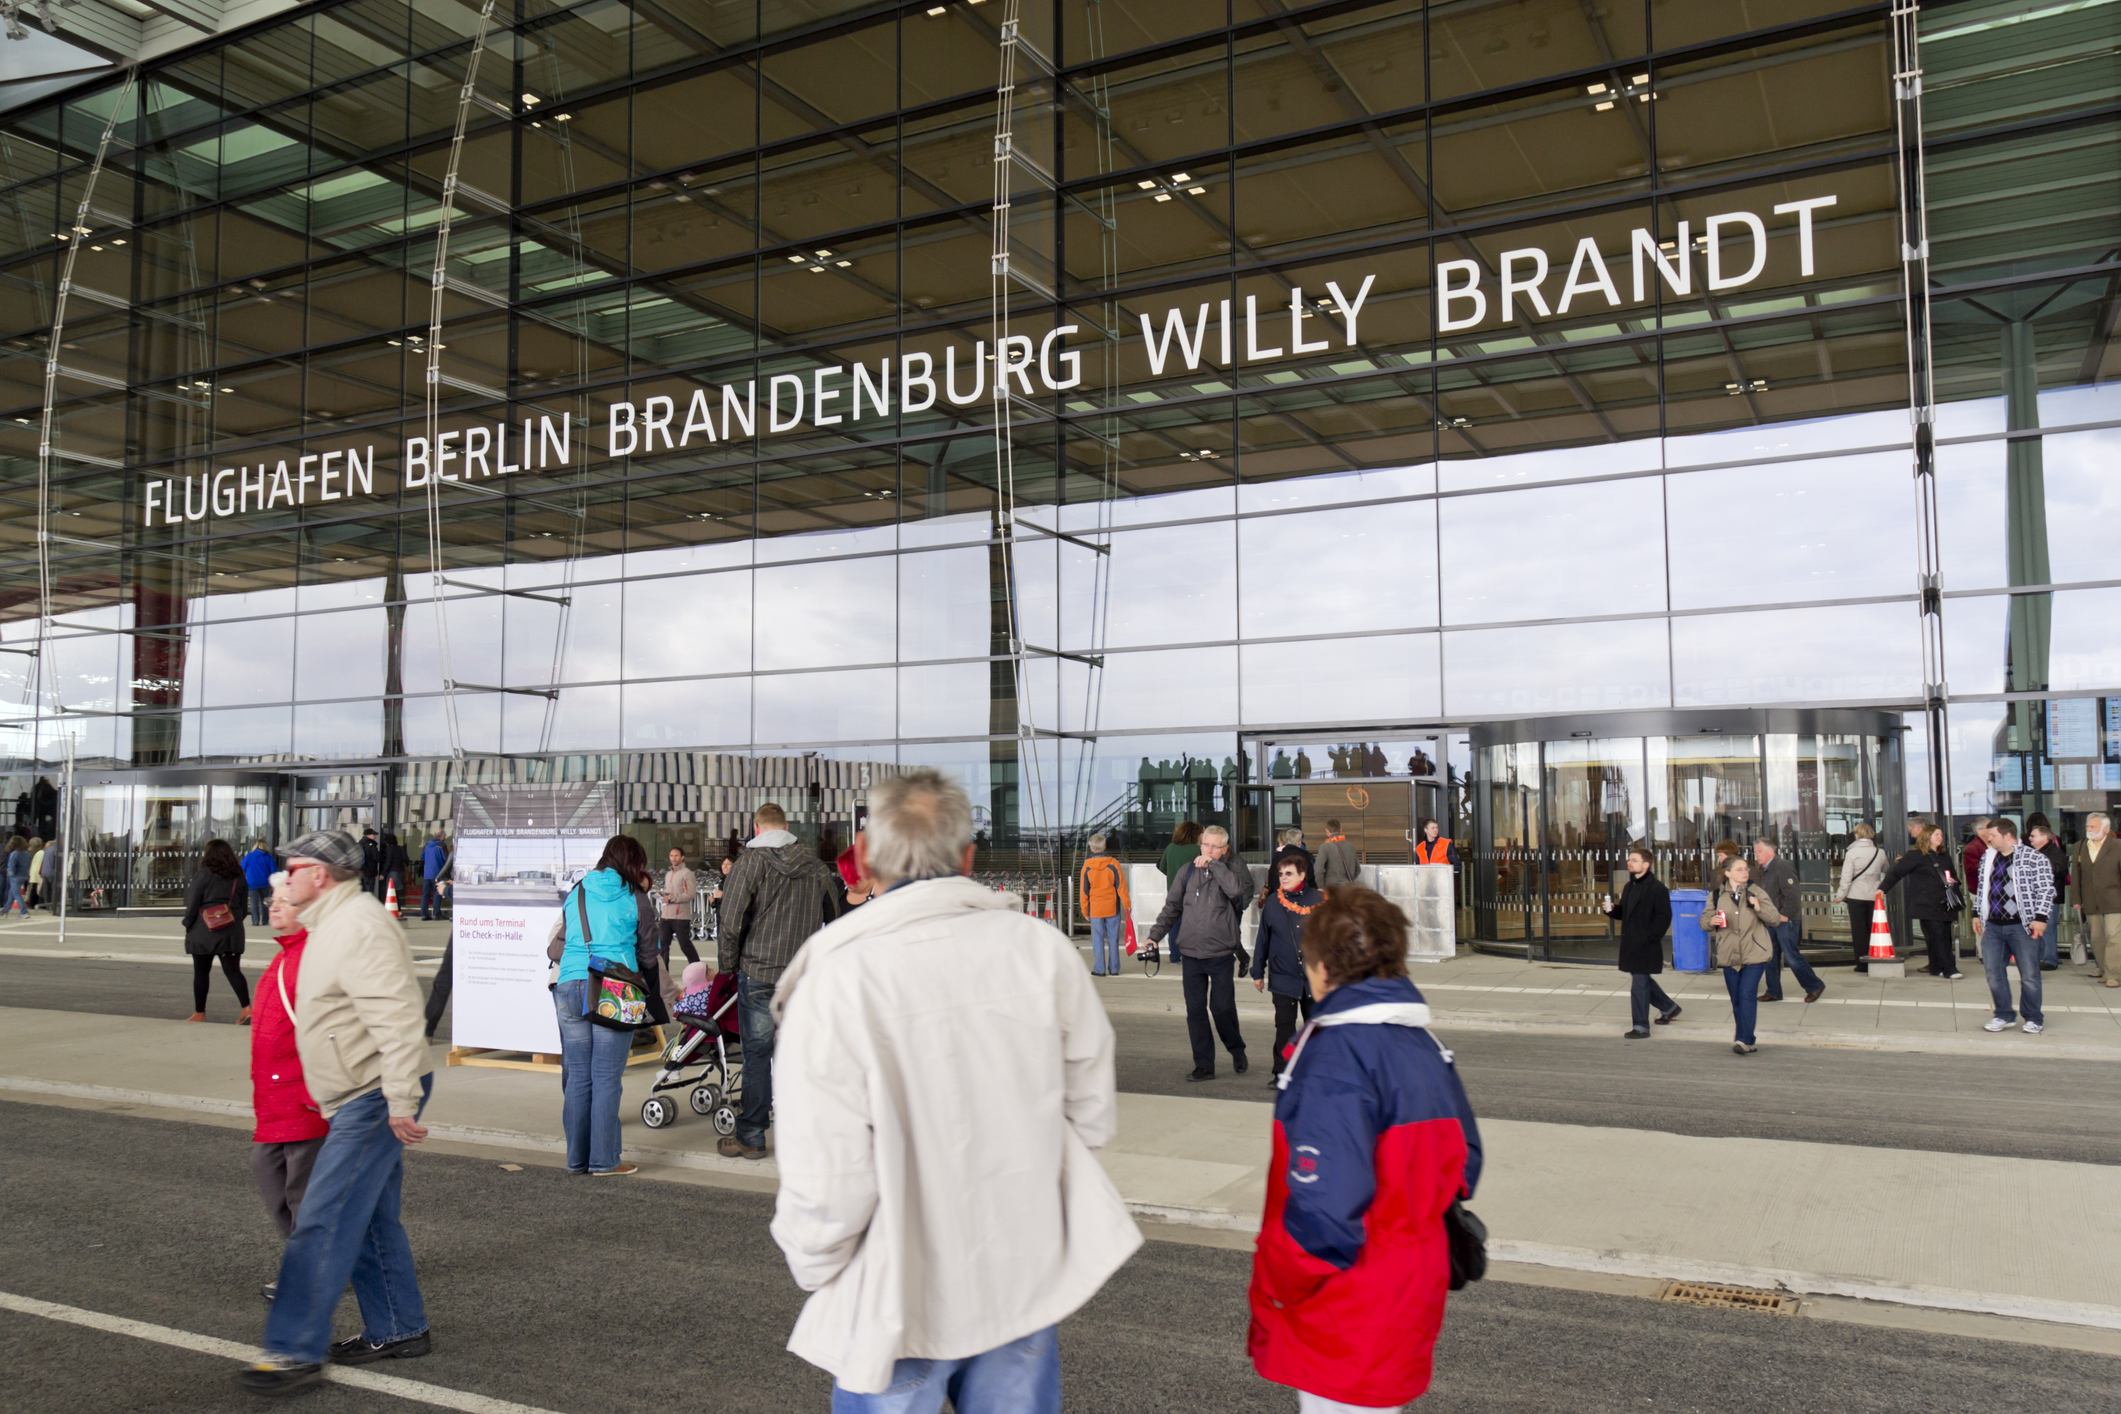 The main entrance of Berlin Brandenburg Willy Brandt Airport with many people in the foreground.